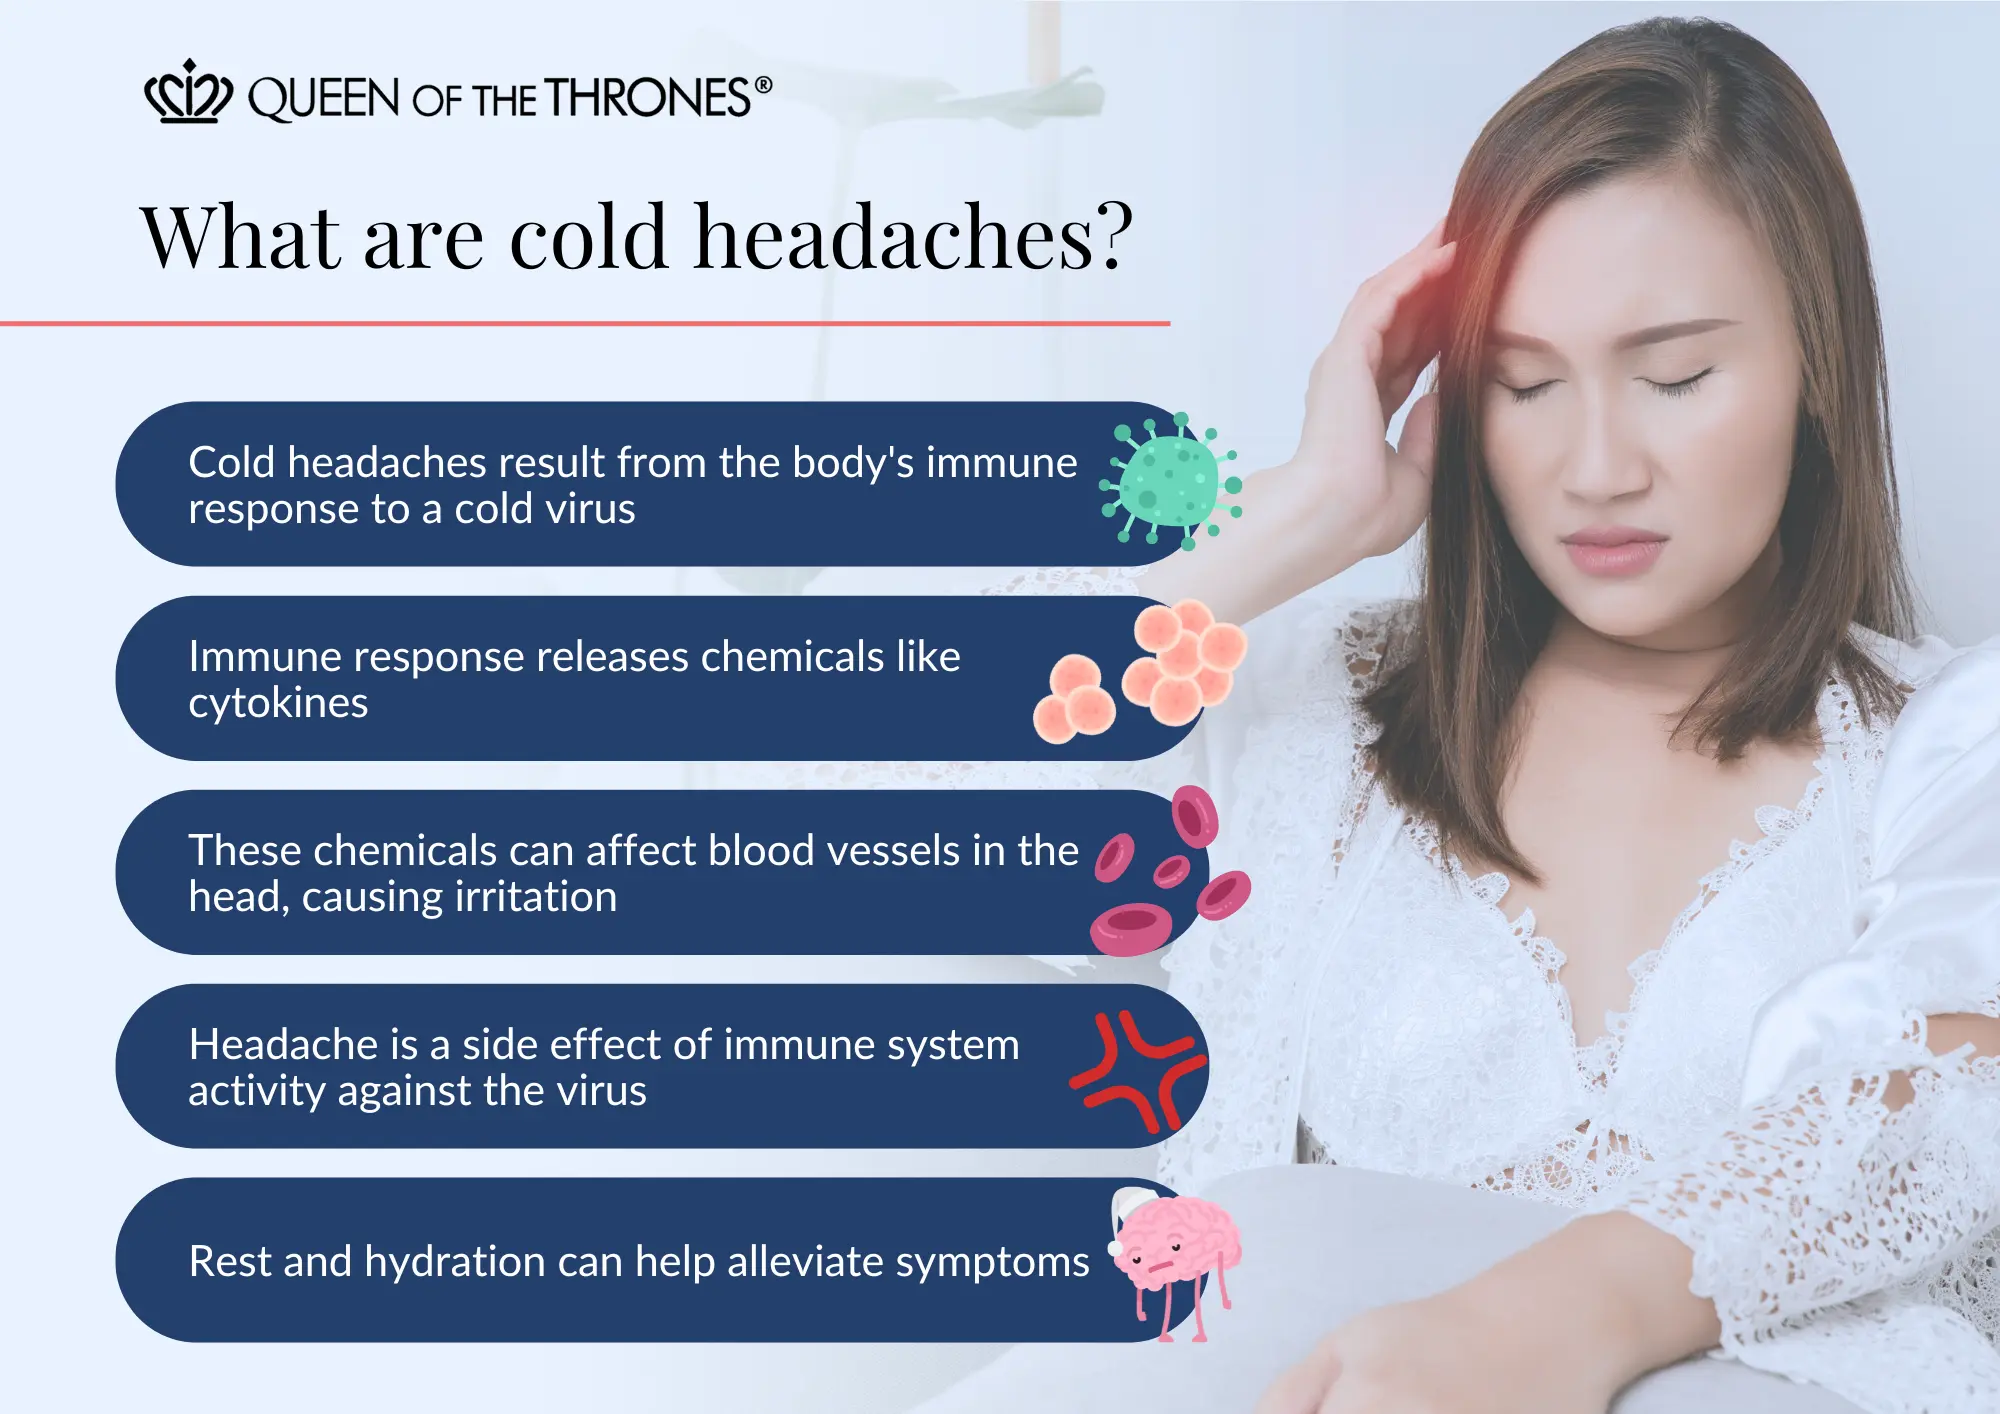 What are cold headaches by Queen of the Thornes